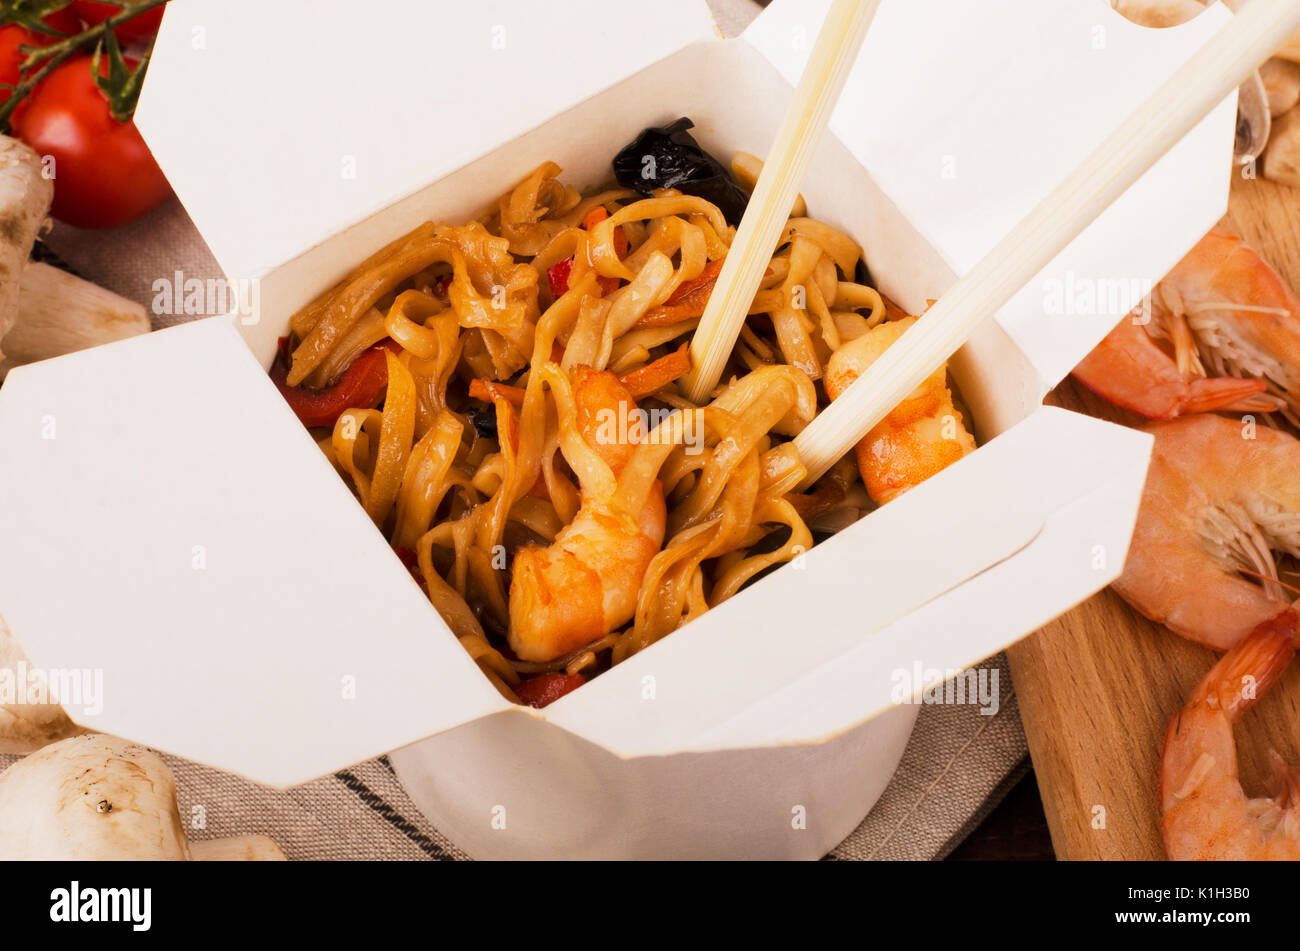 Noodles with vegetables, shrimp with chopsticks on a dark wooden background in a white box Stock Photo